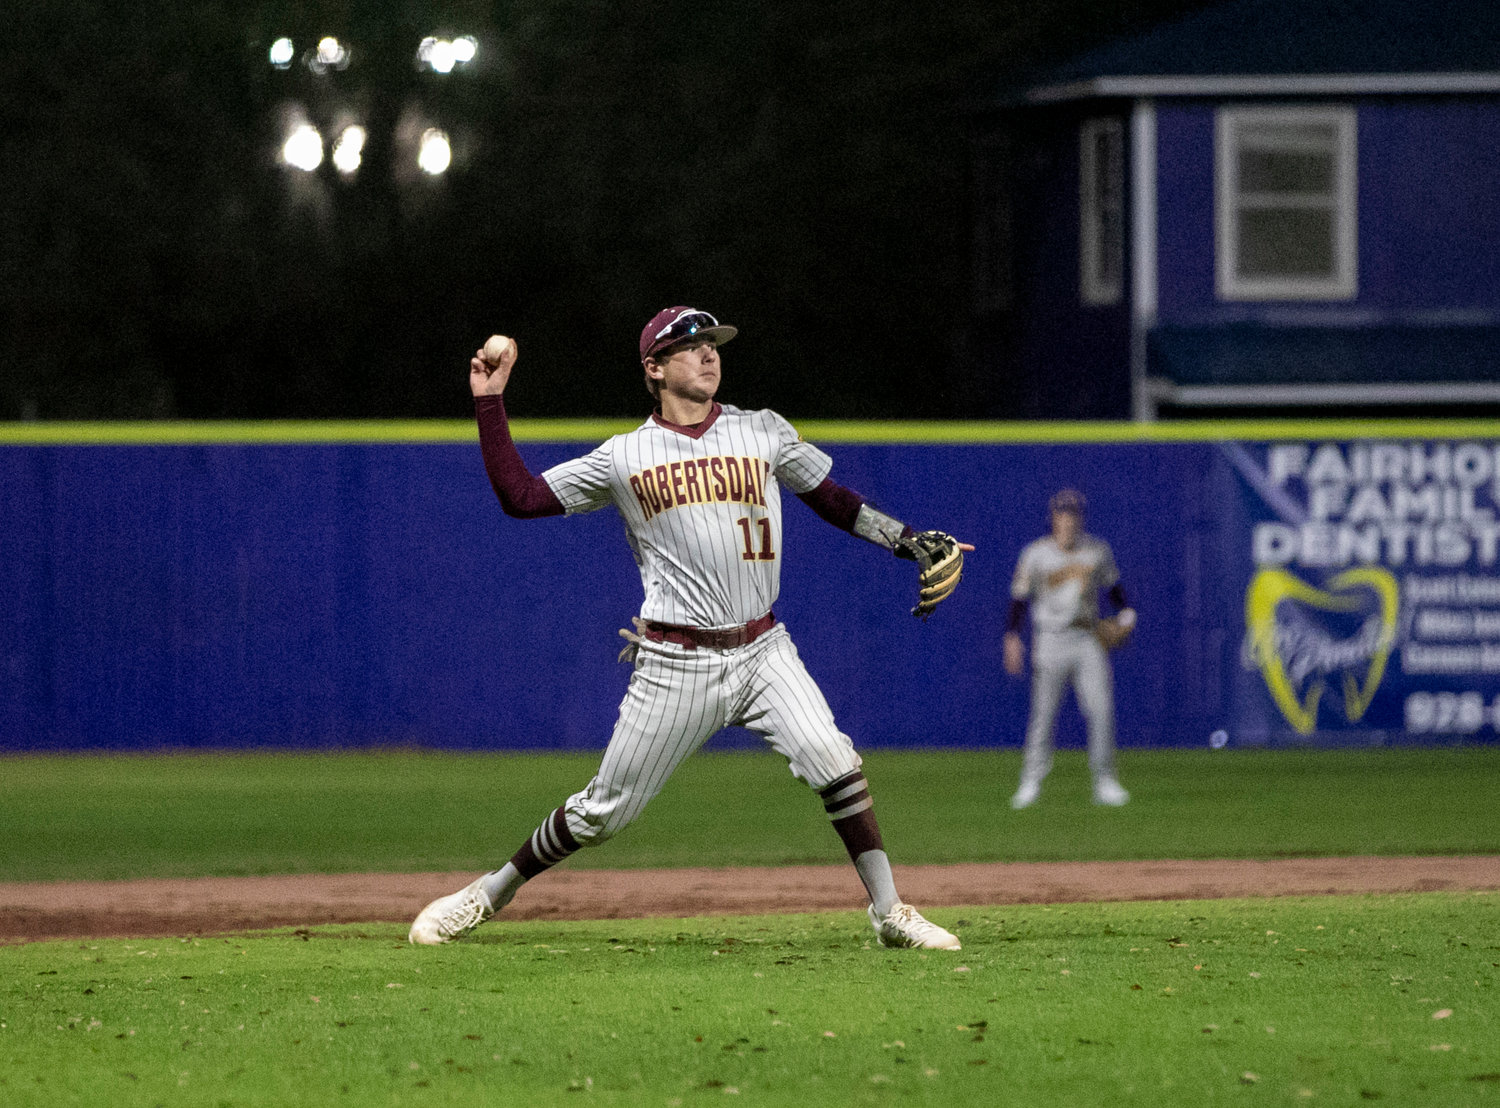 Golden Bear third baseman Ethan Parnell loads up a throw across the diamond for an out in the fourth inning of Robertsdale’s Friday away game against the Fairhope Pirates at Volanta Sports Park.